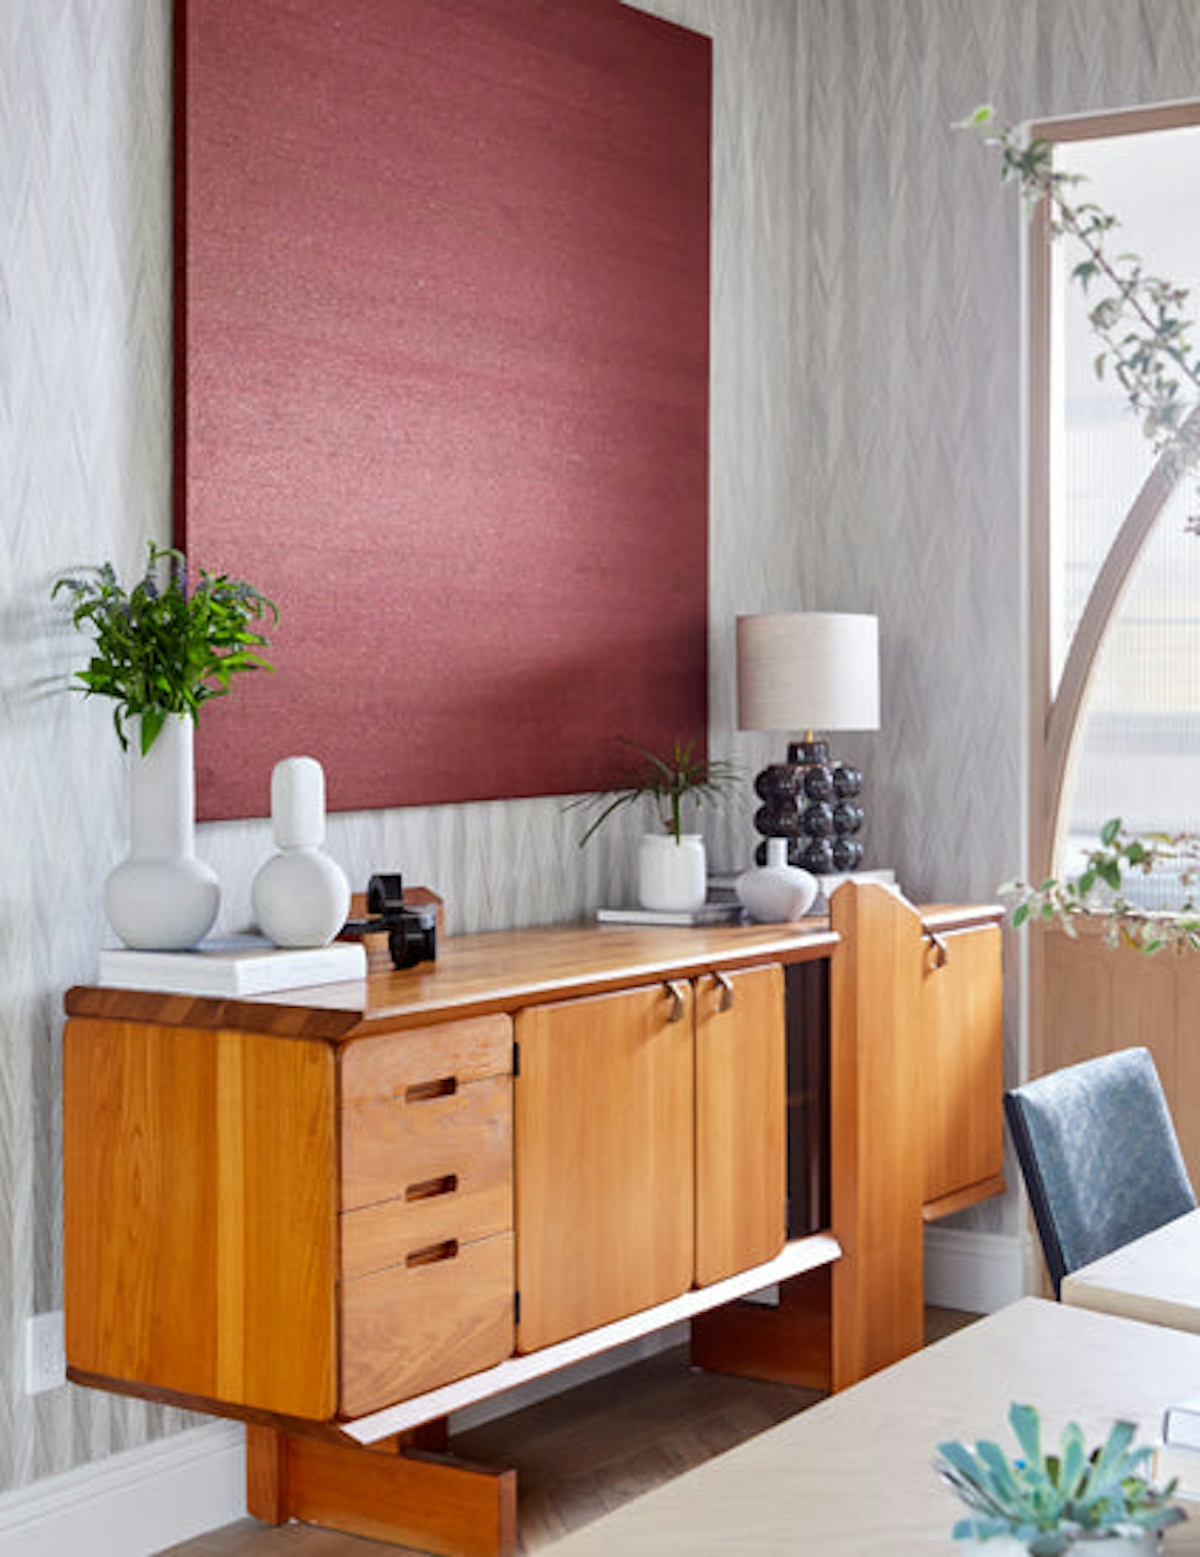 Luxury mid-century sideboards | Kelly Hohla | Shop sideboards online at LuxDeco.com